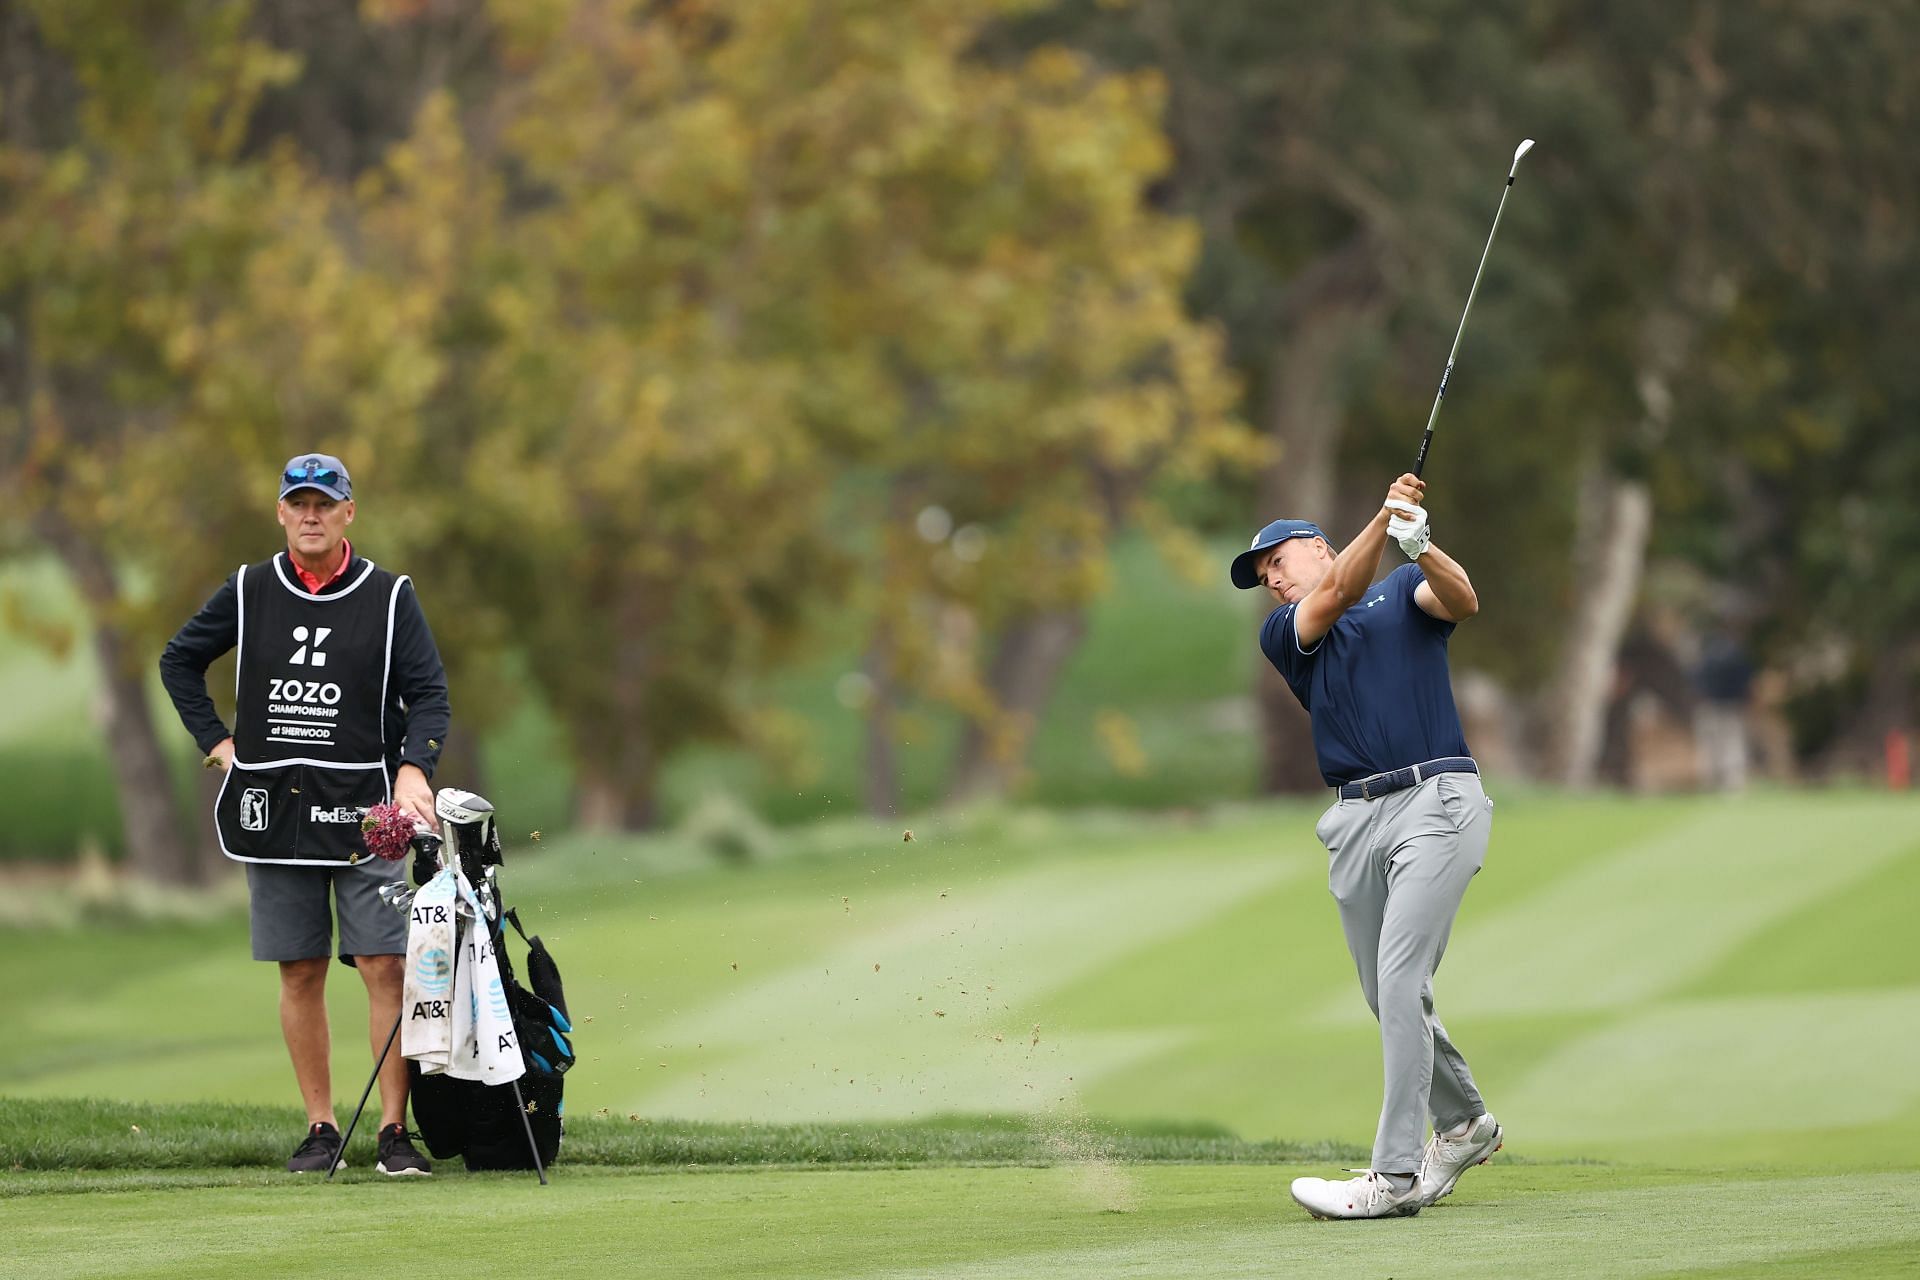 Jordan Spieth and father Shawn at the Zozo Championship @ Sherwood - Round Two (Image via Ezra Shaw/Getty Images)